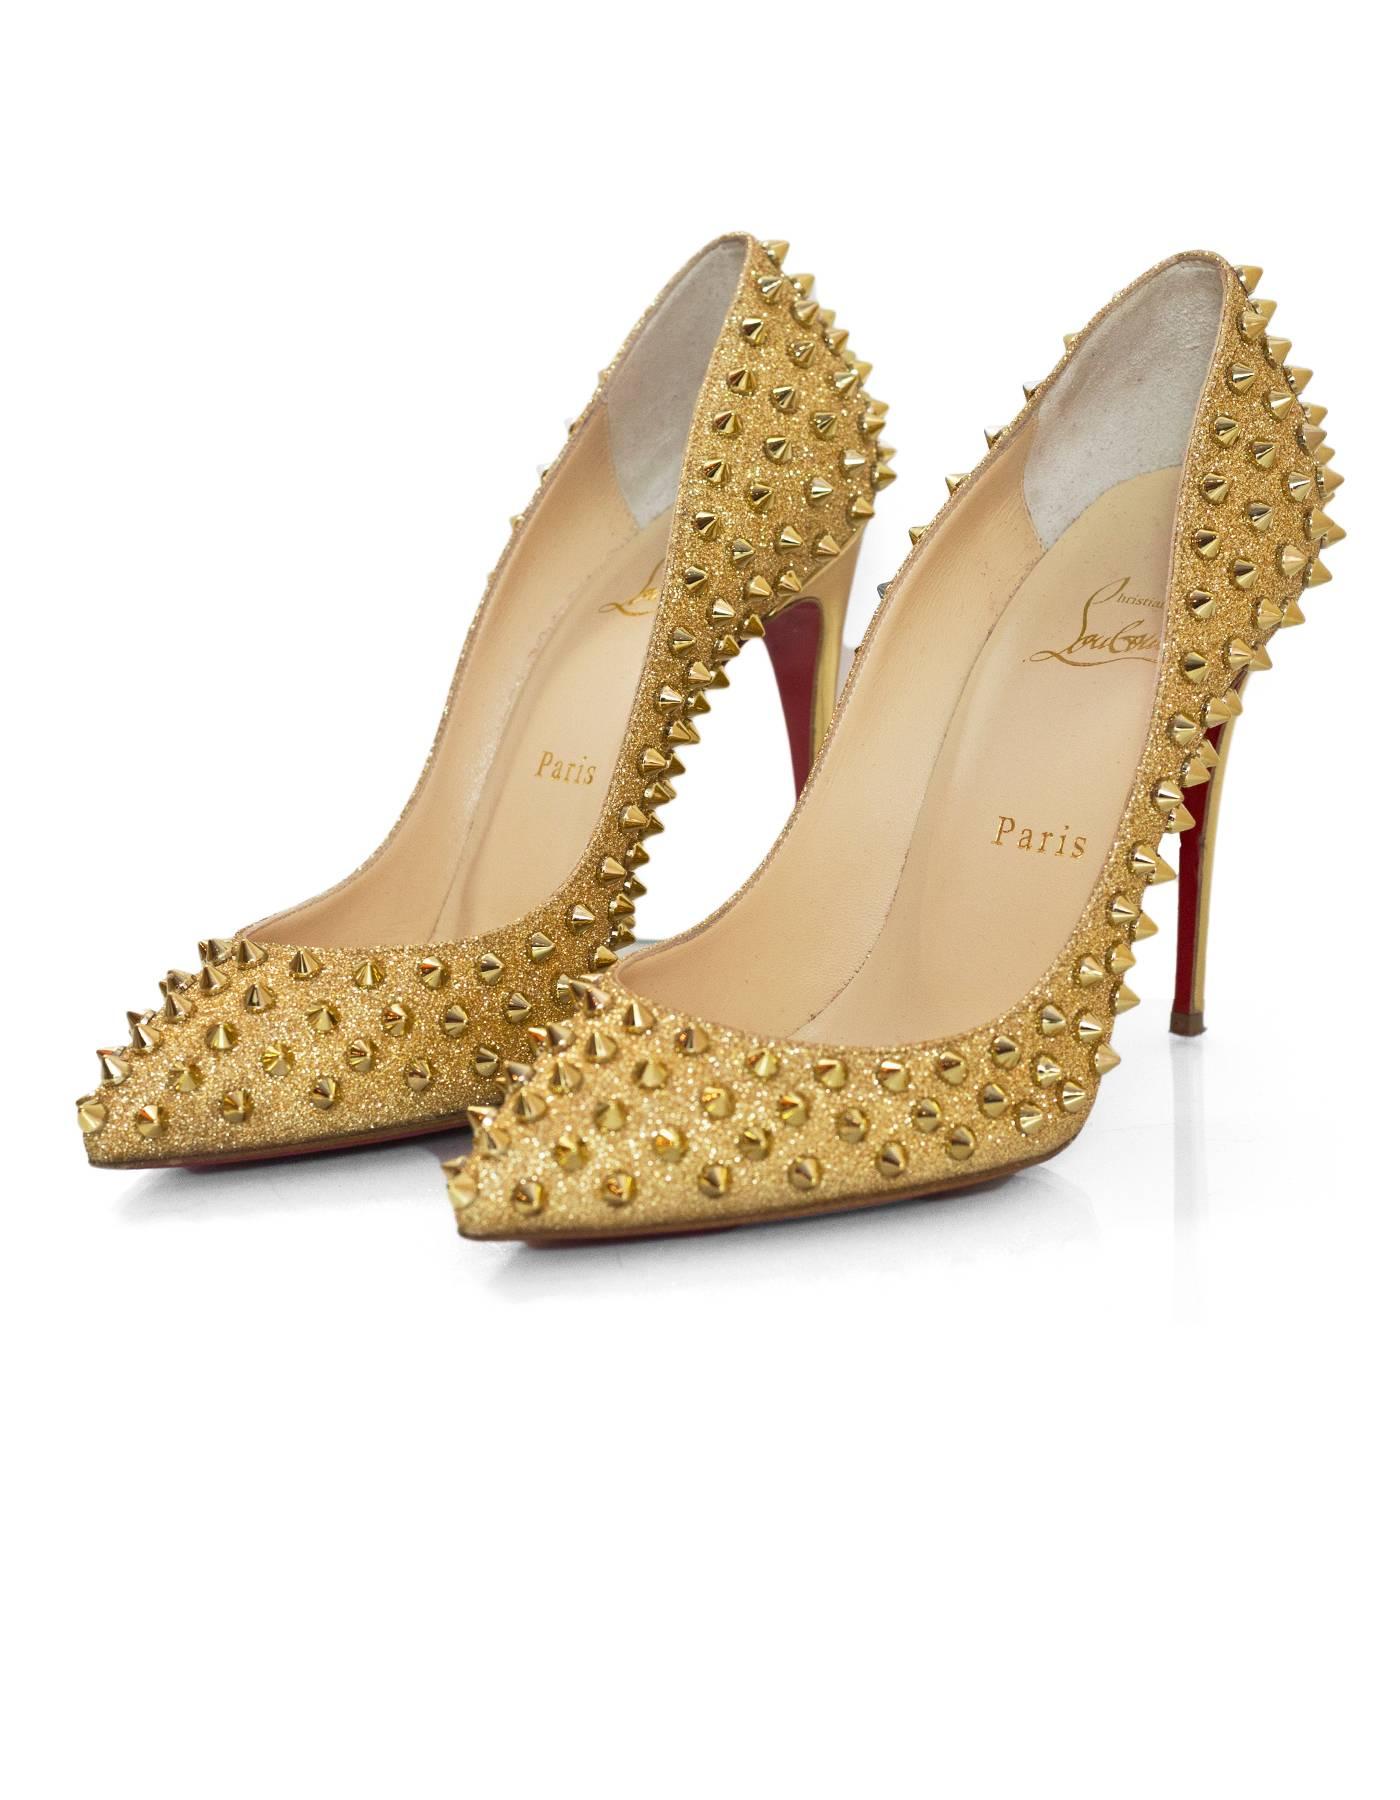 Christian Louboutin Gold Glitter Follies Spikes 100 Pumps Sz 38

Made In: Italy
Color: Gold
Materials: Glitter, metal
Closure/Opening: Slide on
Sole Stamp: Christian Louboutin Made in Italy 38
Retail Price: $1,295
Overall Condition: Excellent